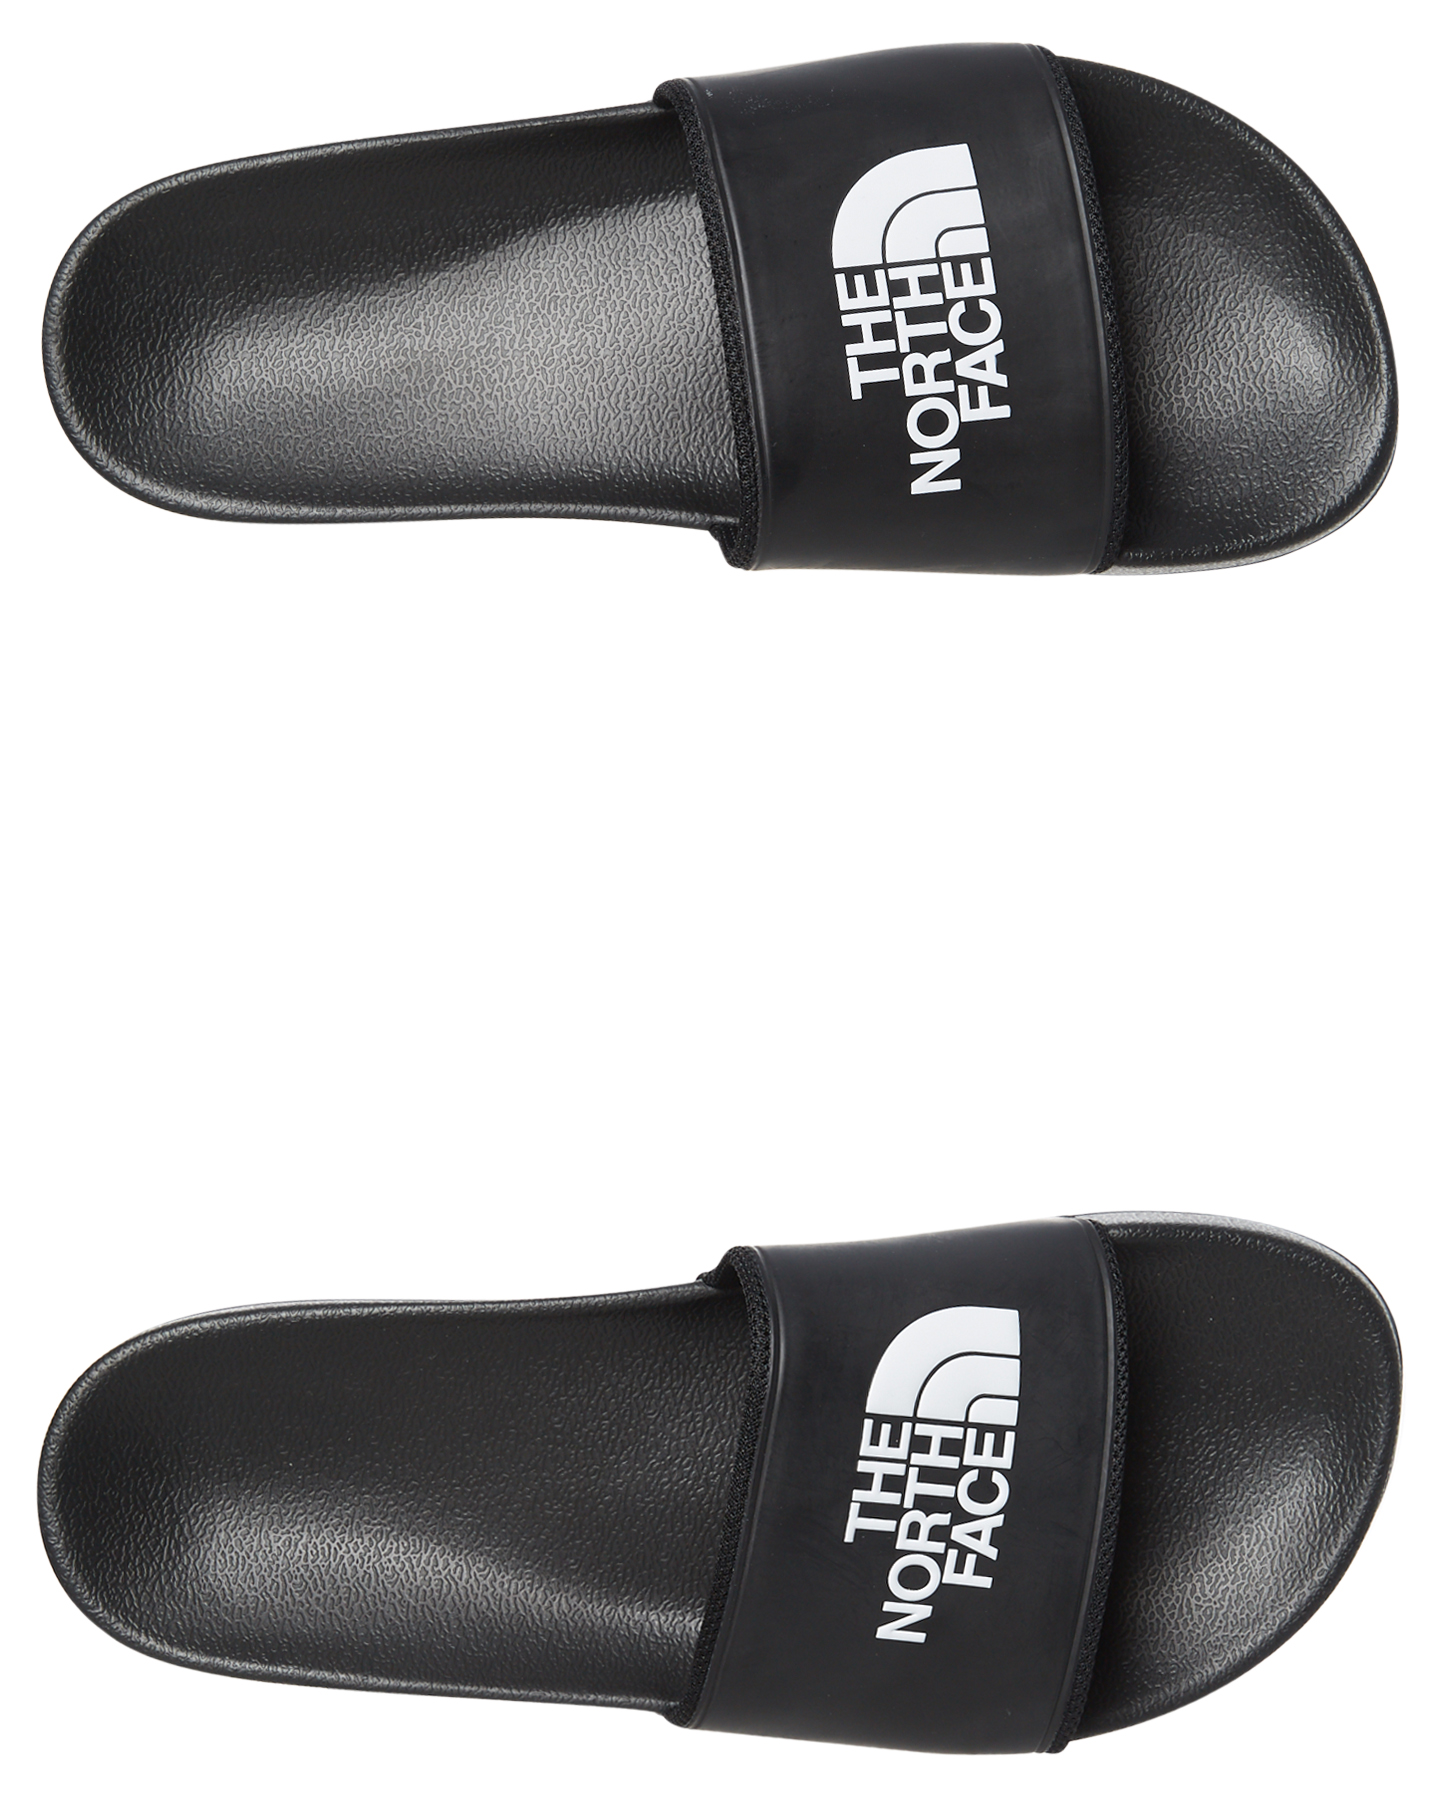 North Face Slippers Size Chart